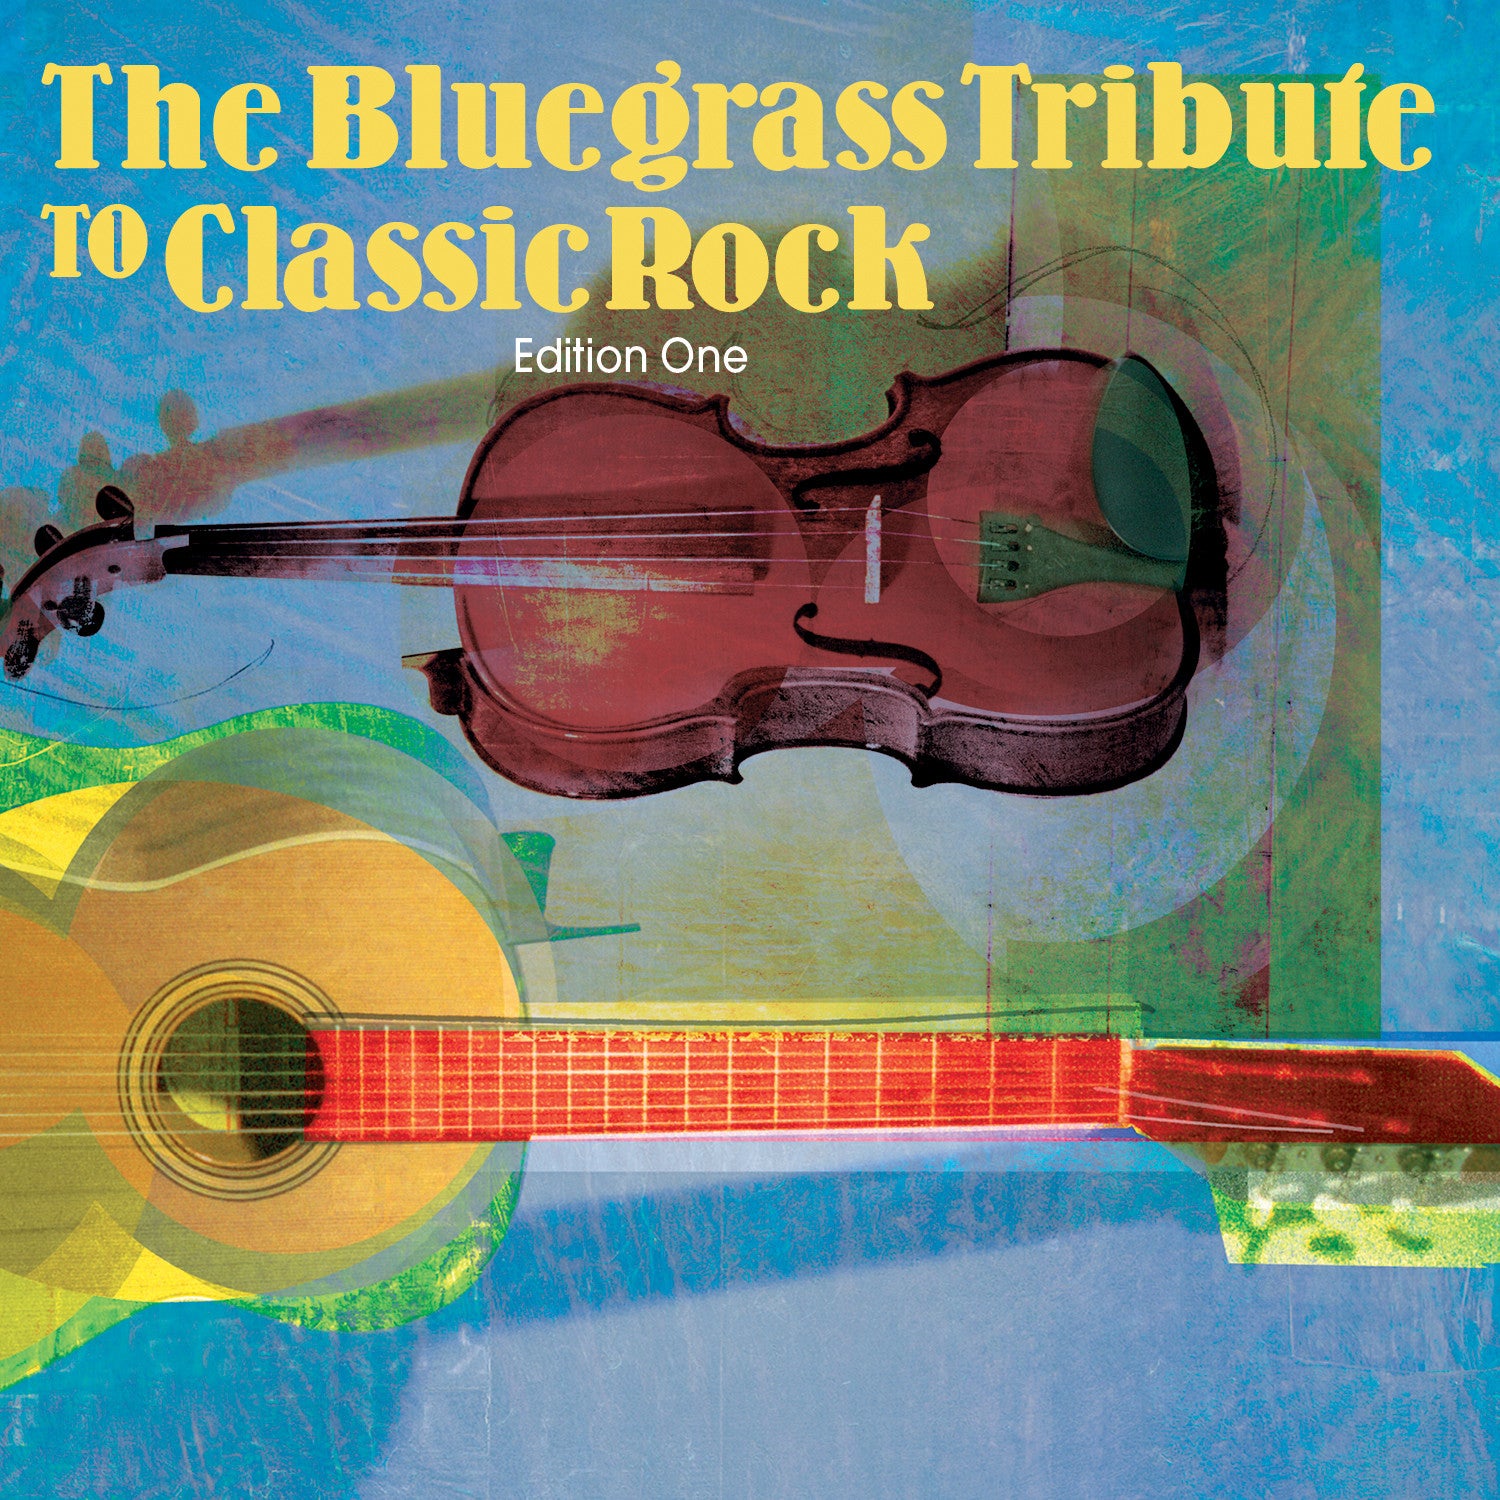 The Bluegrass Tribute to Classic Rock